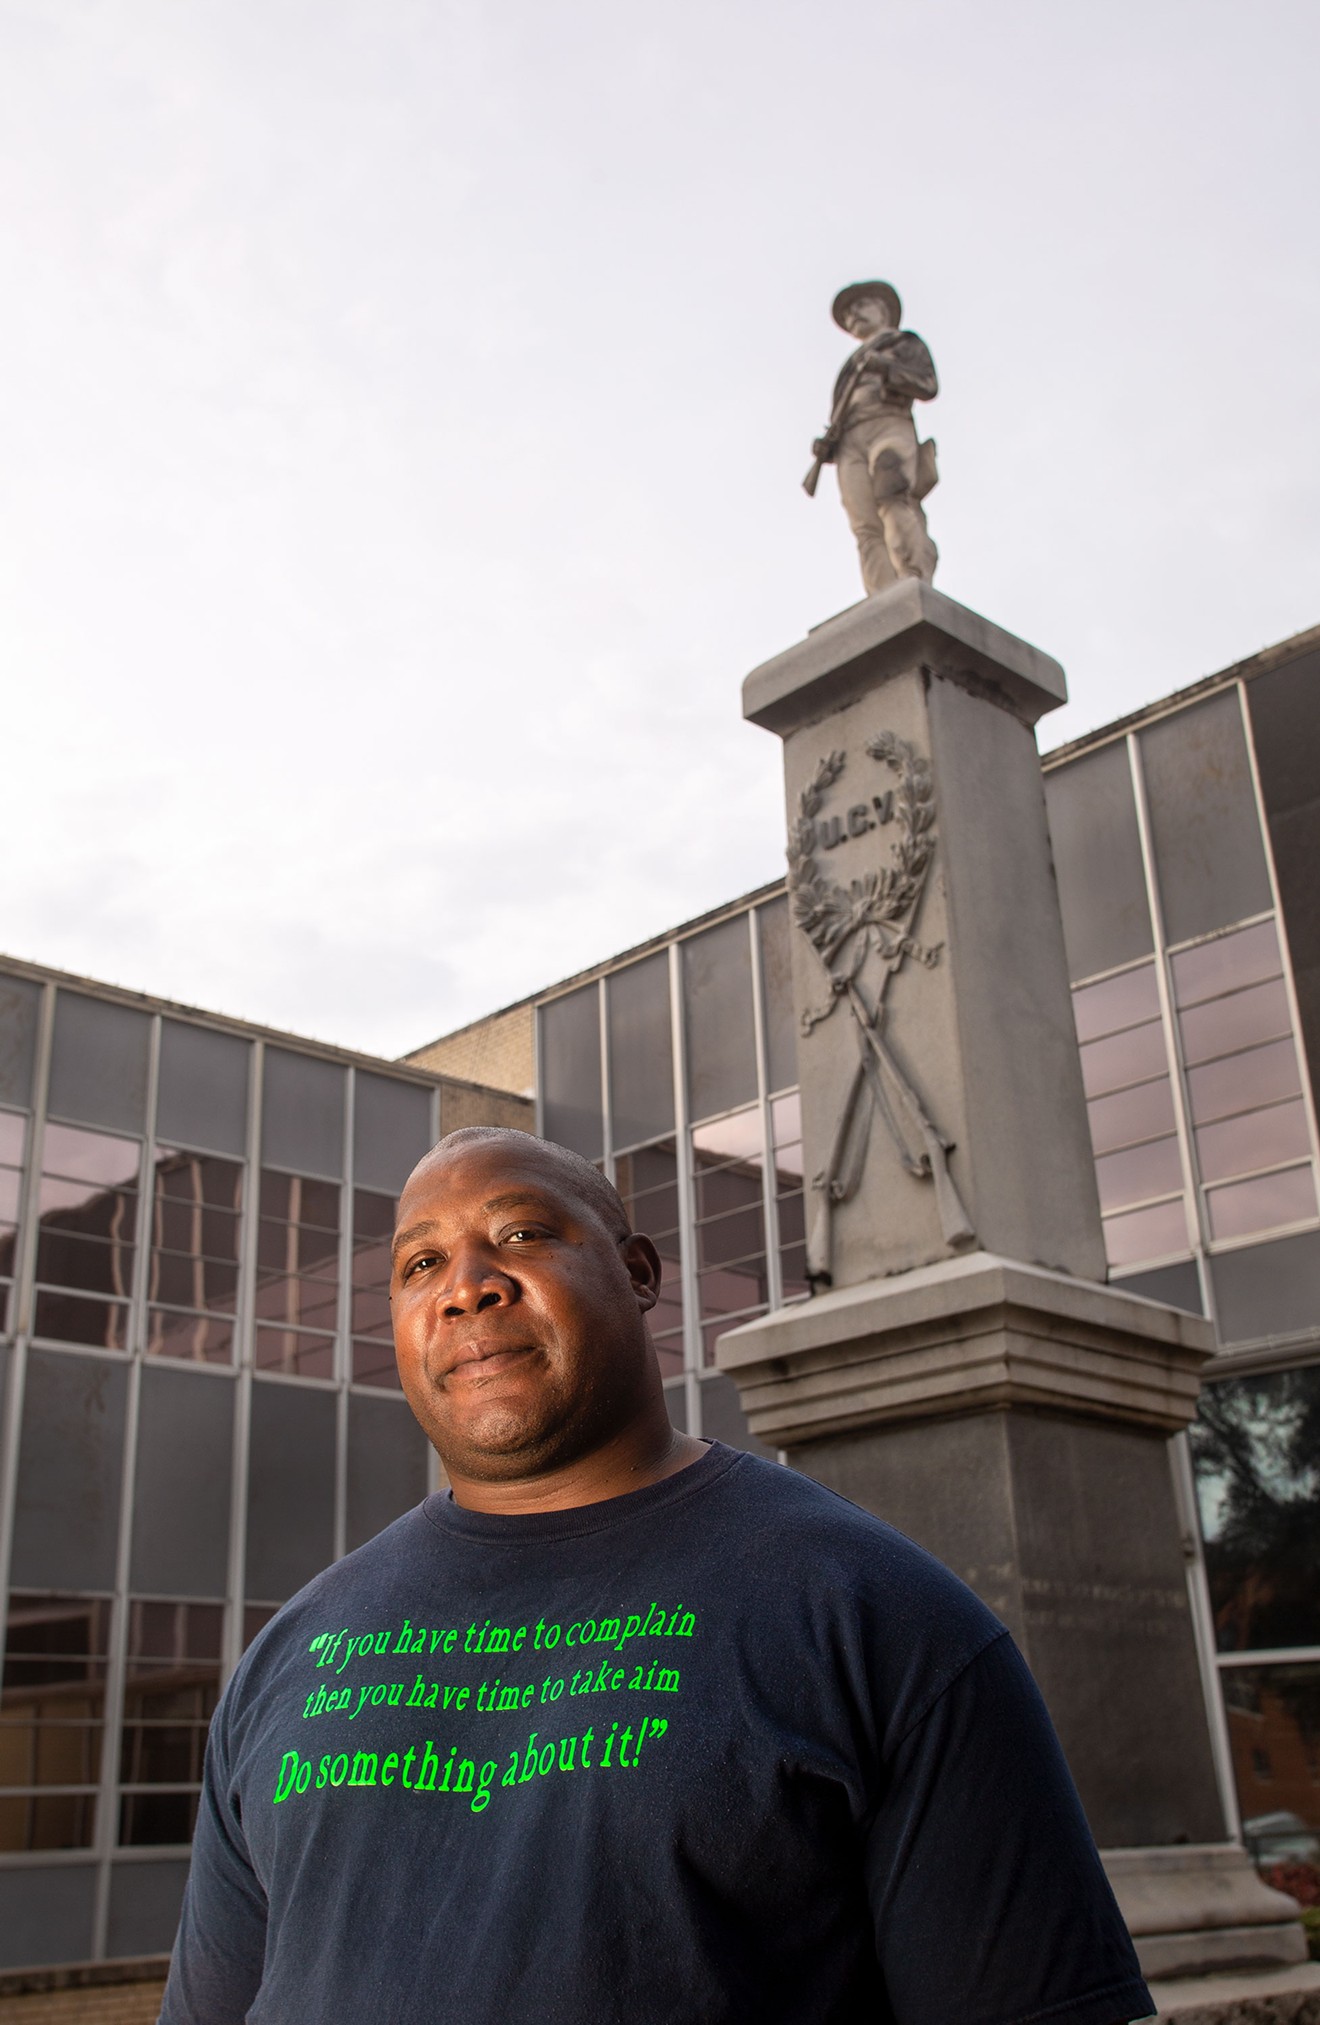 James Henderson has been fighting to move the Confederate monument from in front of the court building in Kaufmann.